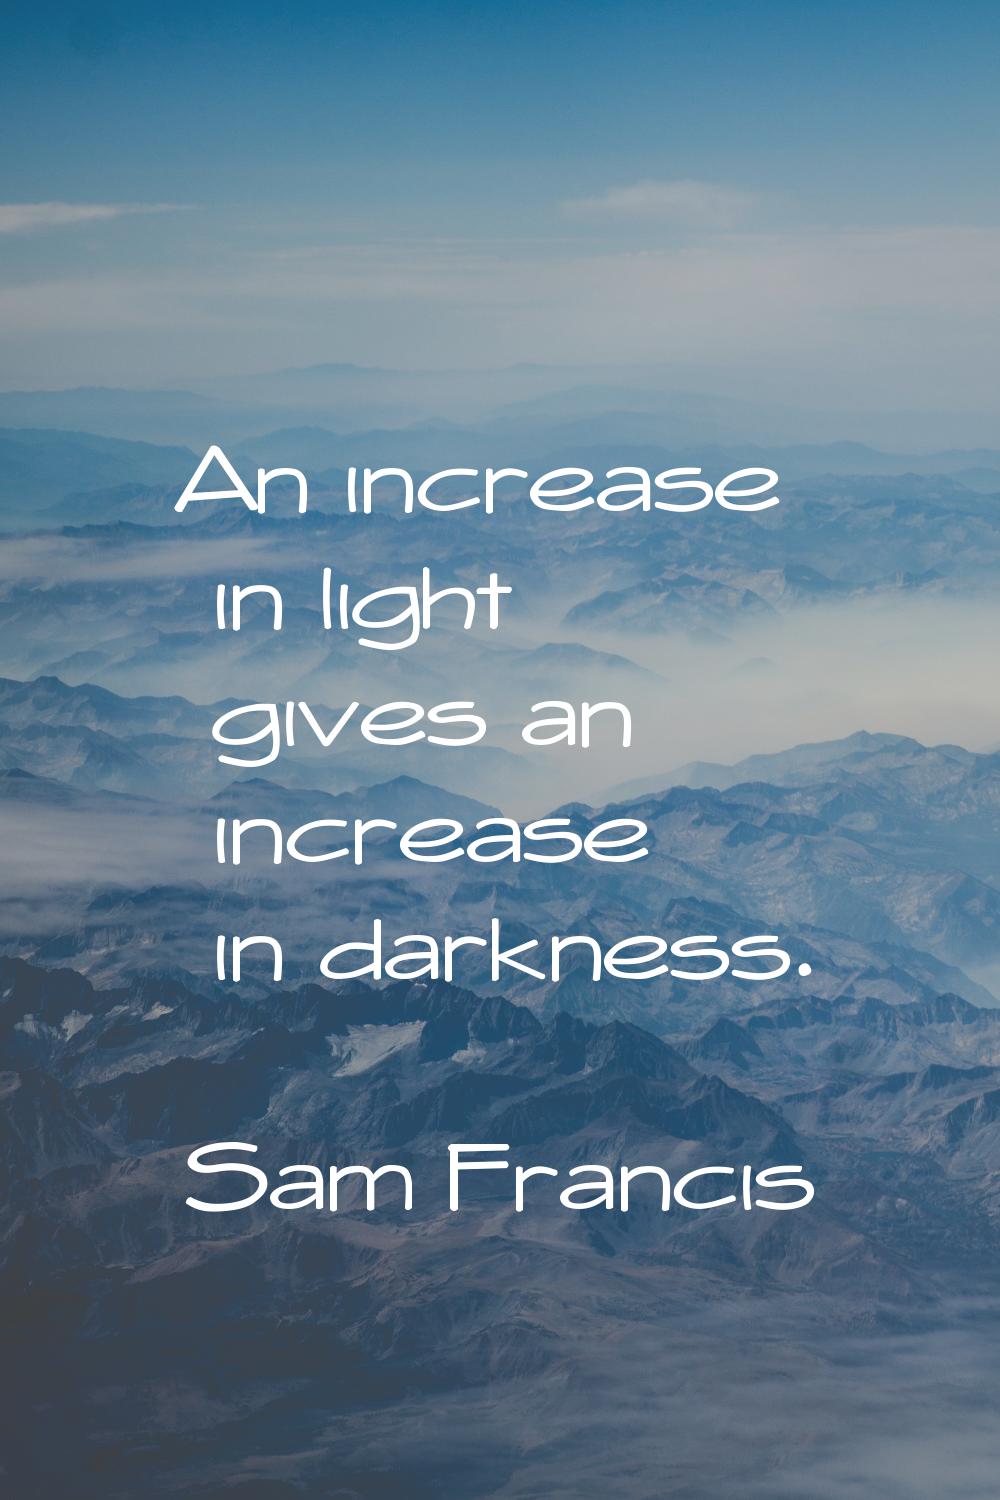 An increase in light gives an increase in darkness.